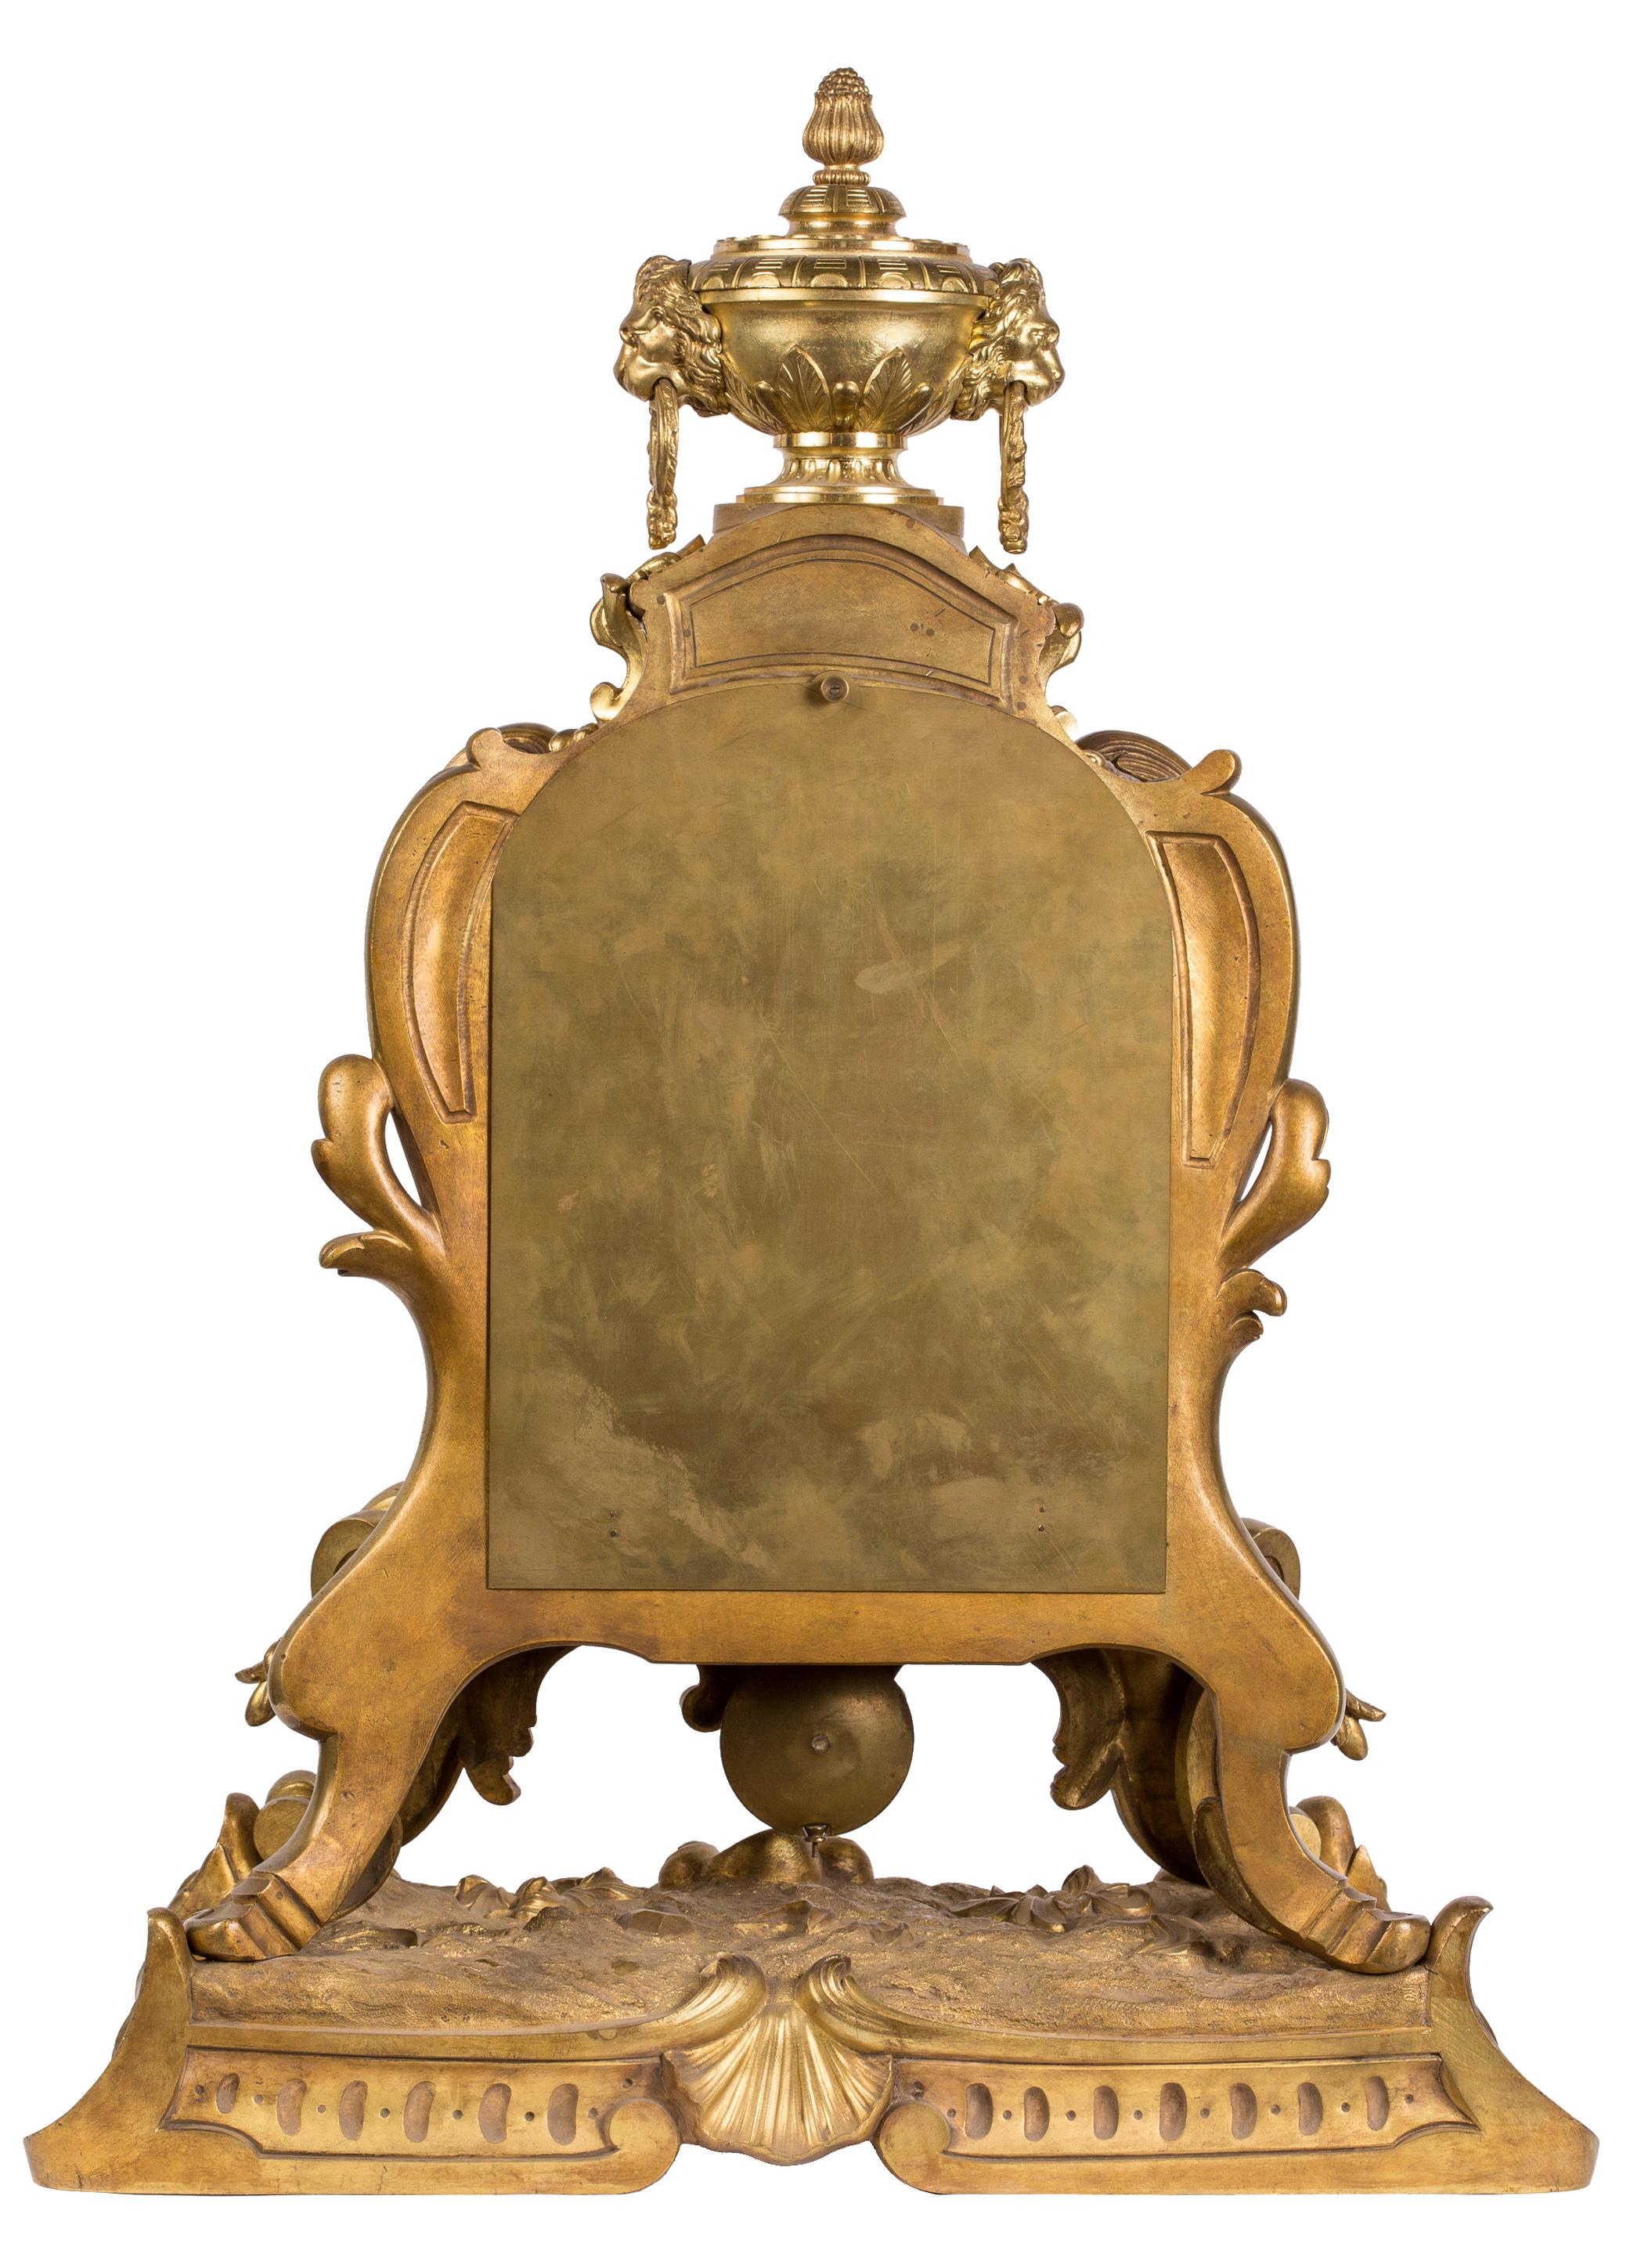 Metal 19th Century Antique French Ormolu Bronze Mantel Clock with Musical Design Motif For Sale